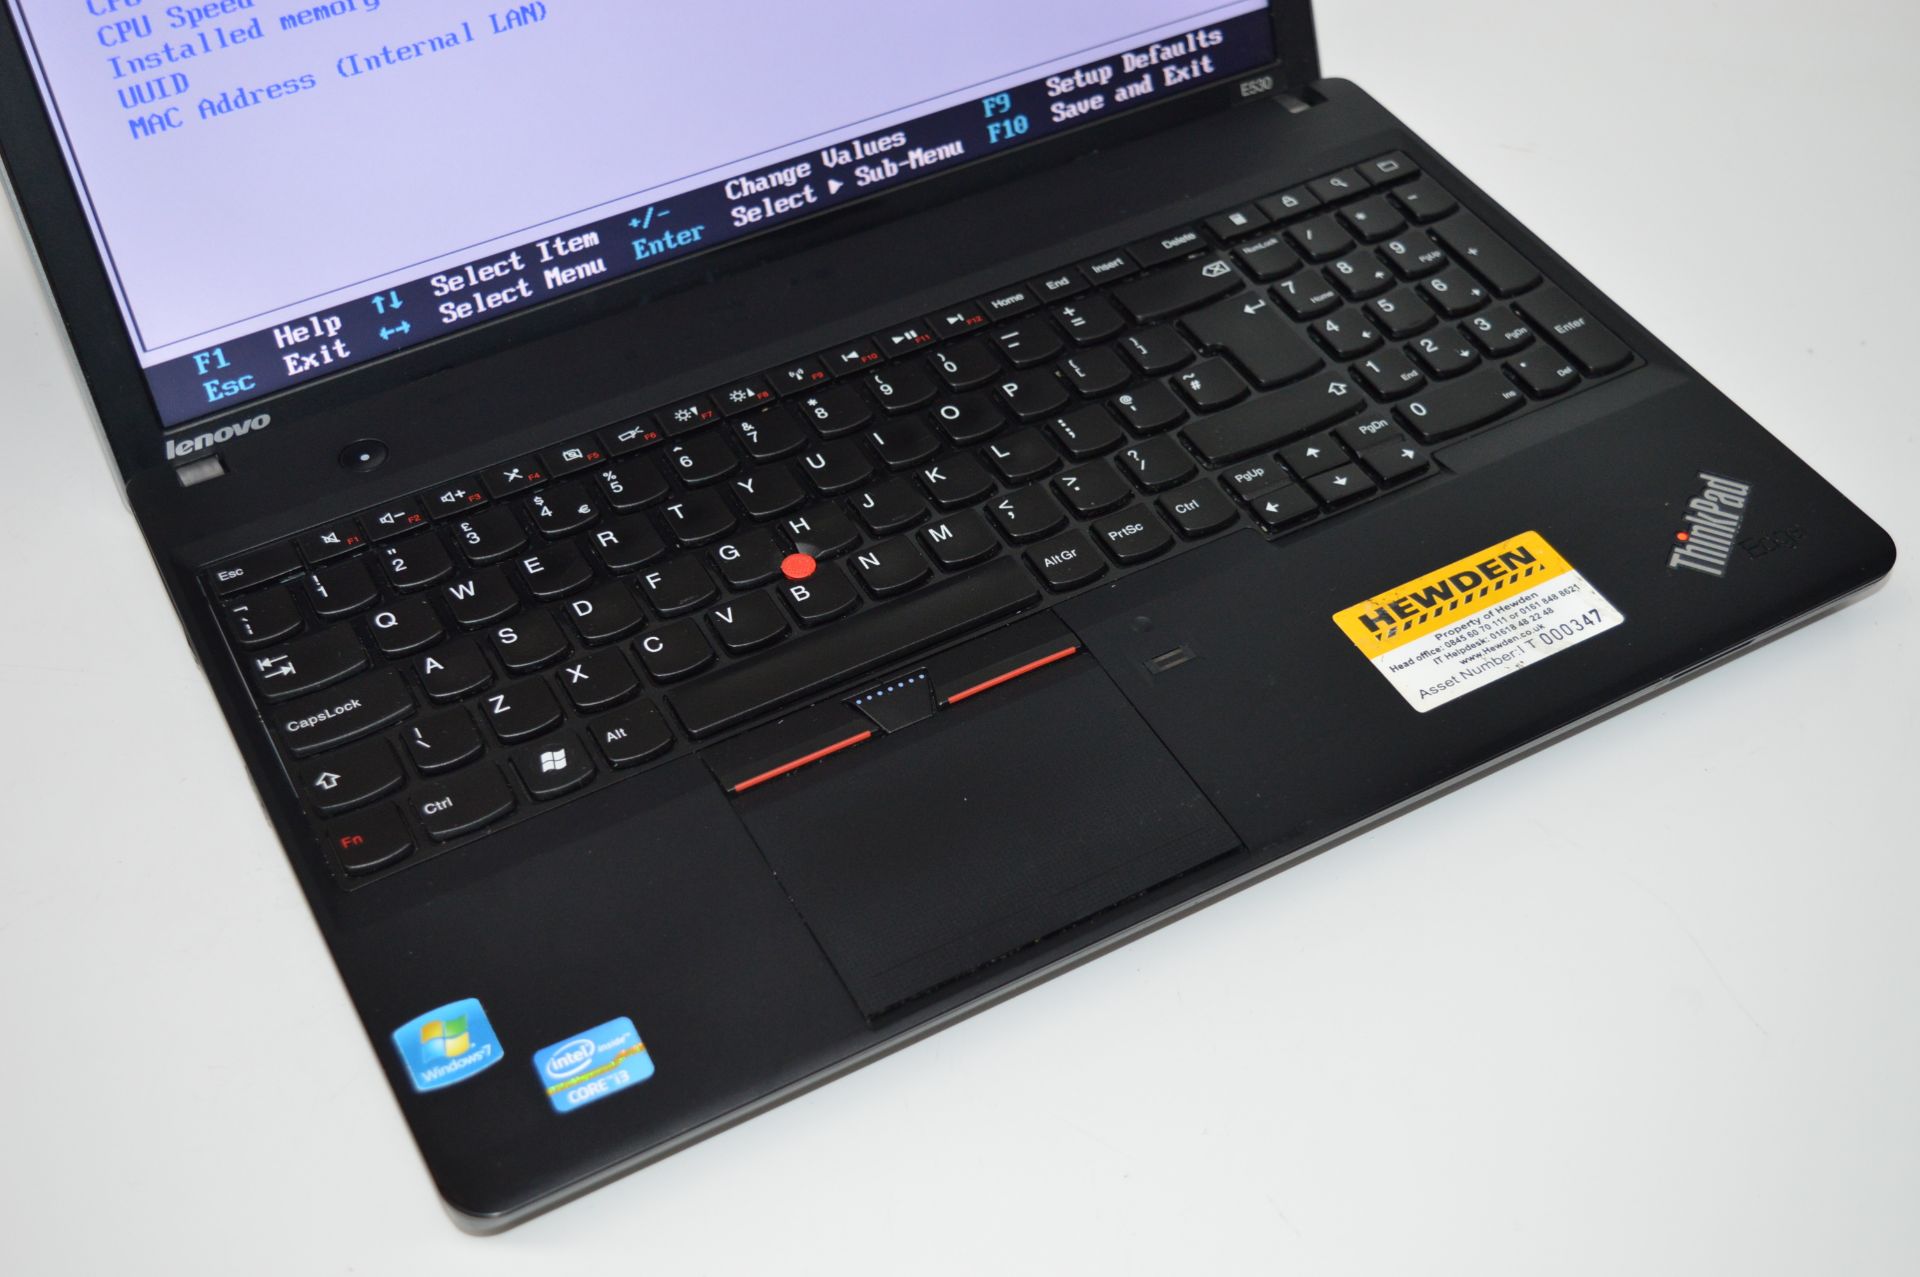 1 x Lenovo Thinkpad E530 Laptop Computer - Features 15.6 Inch Screen, Intel Core i3-2370M 2.4ghz - Image 2 of 5